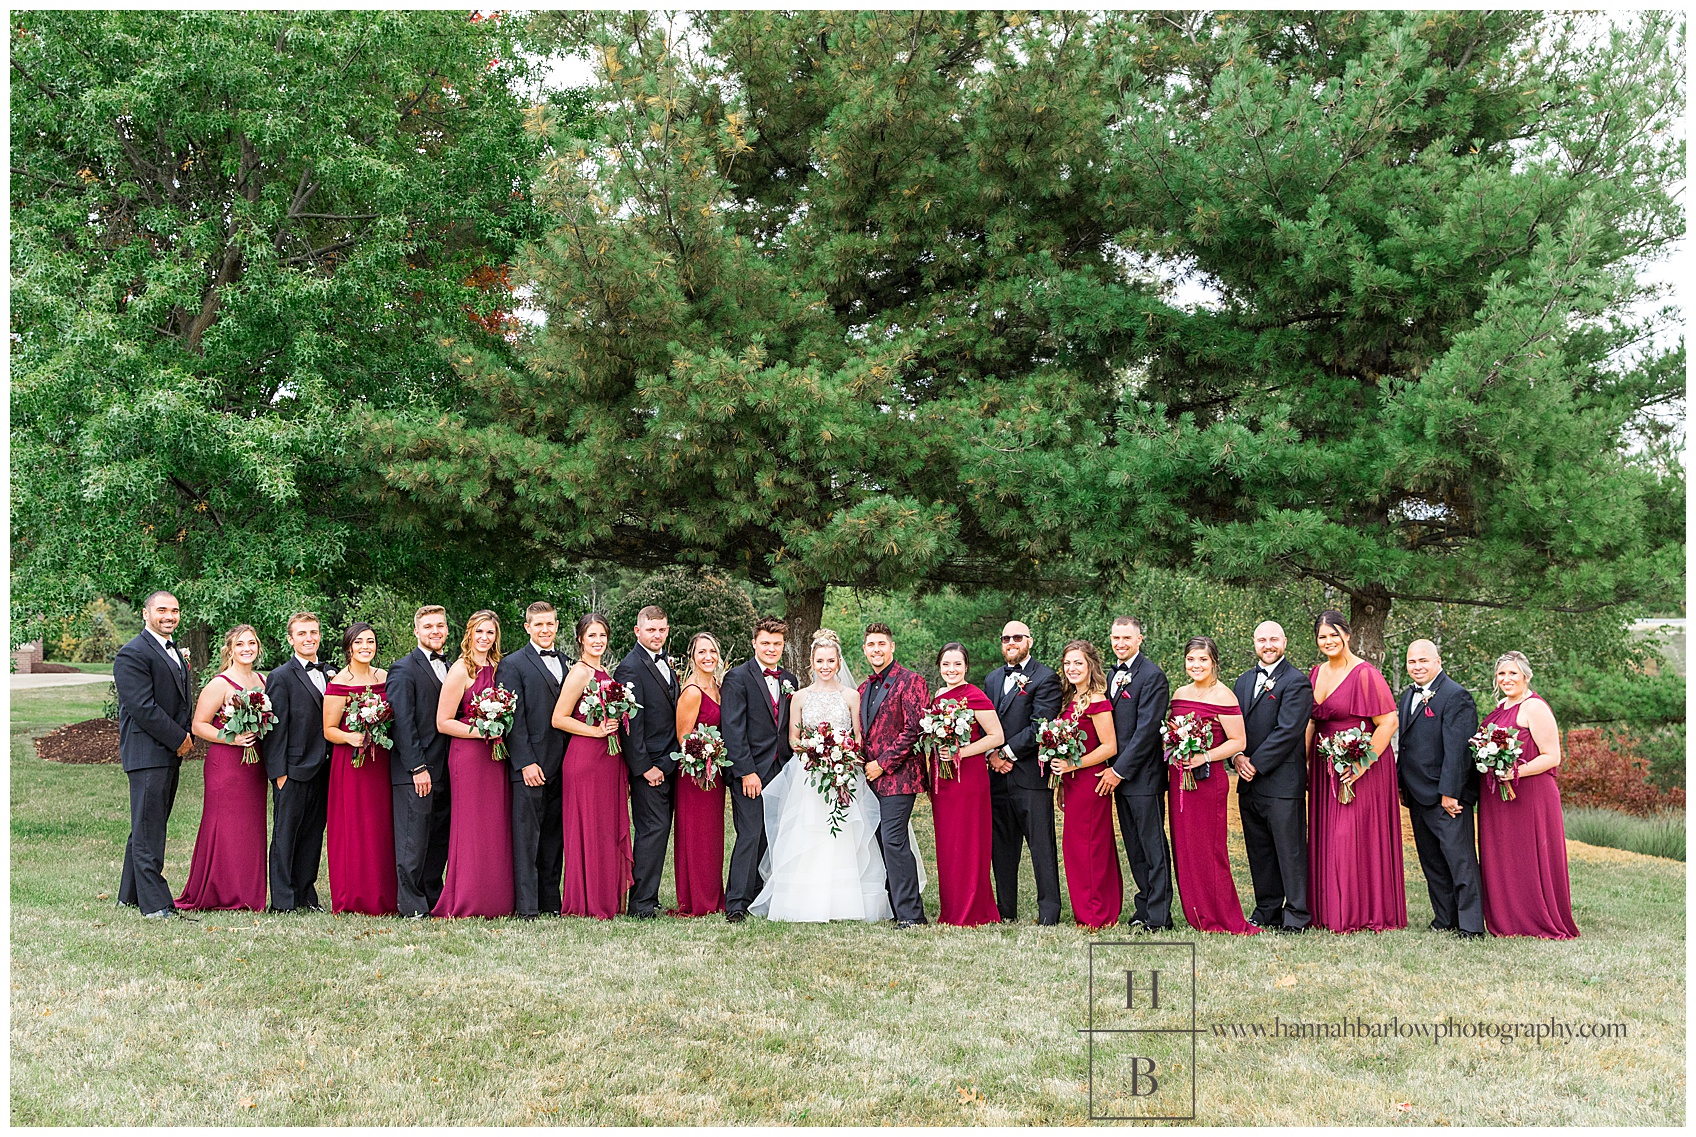 Large Bridal Party Photo in Canonsburg, PA